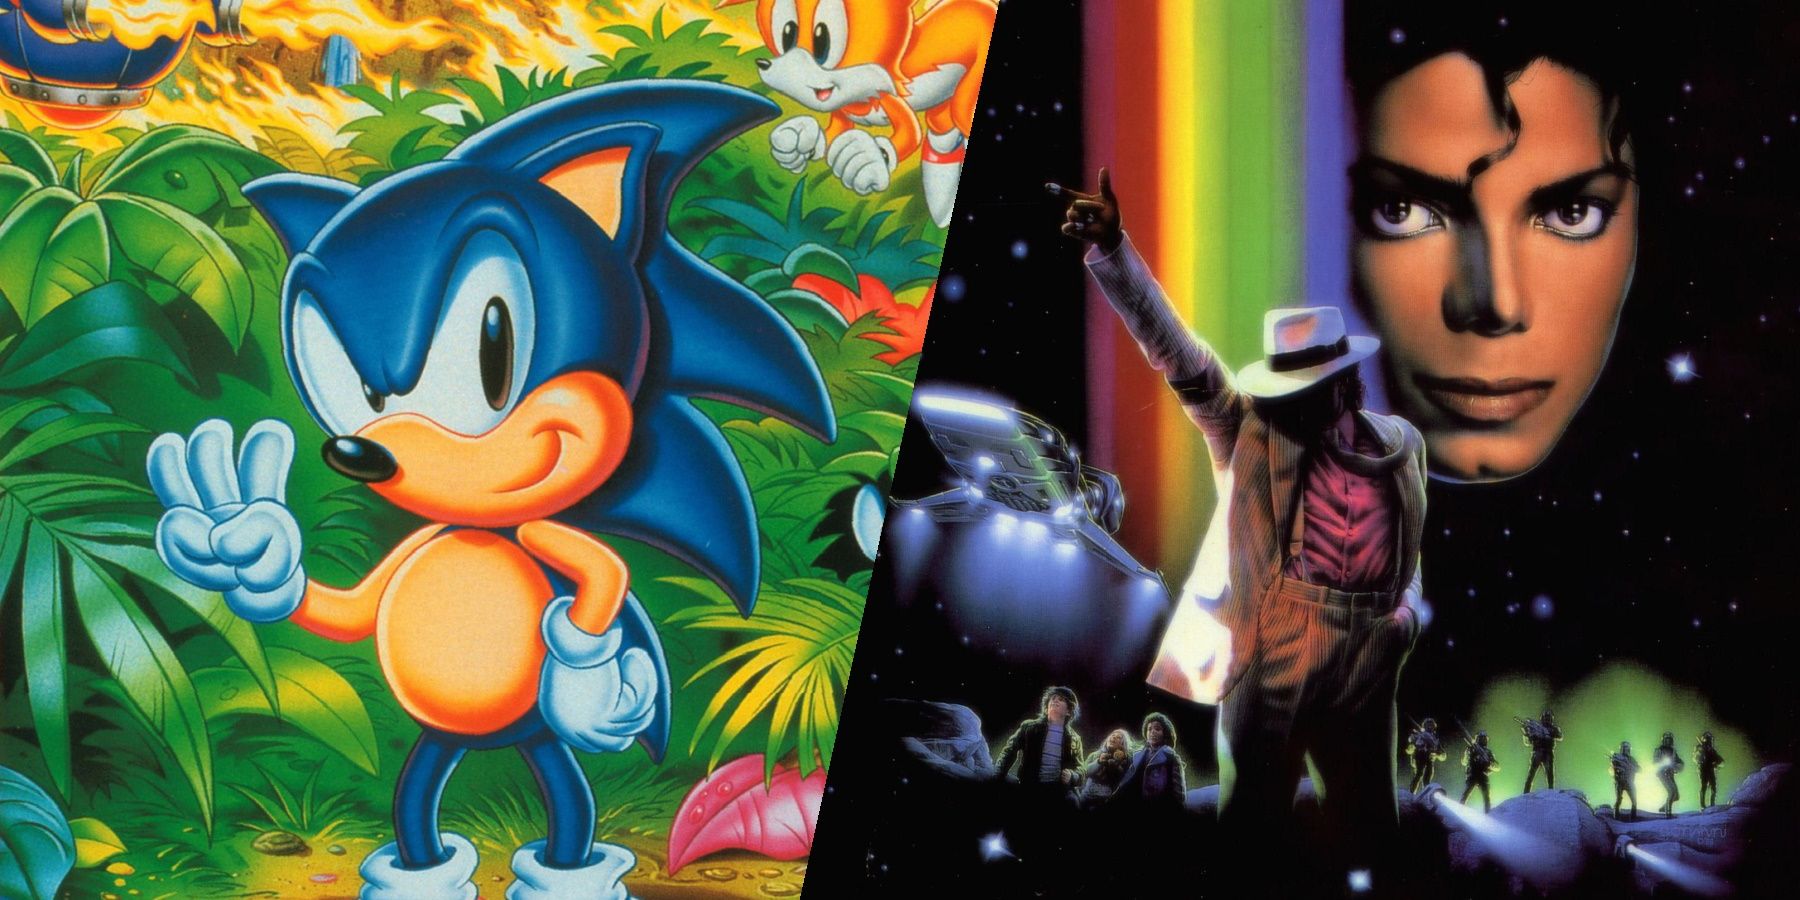 Michael Jackson DID compose music for Sonic the Hedgehog 3